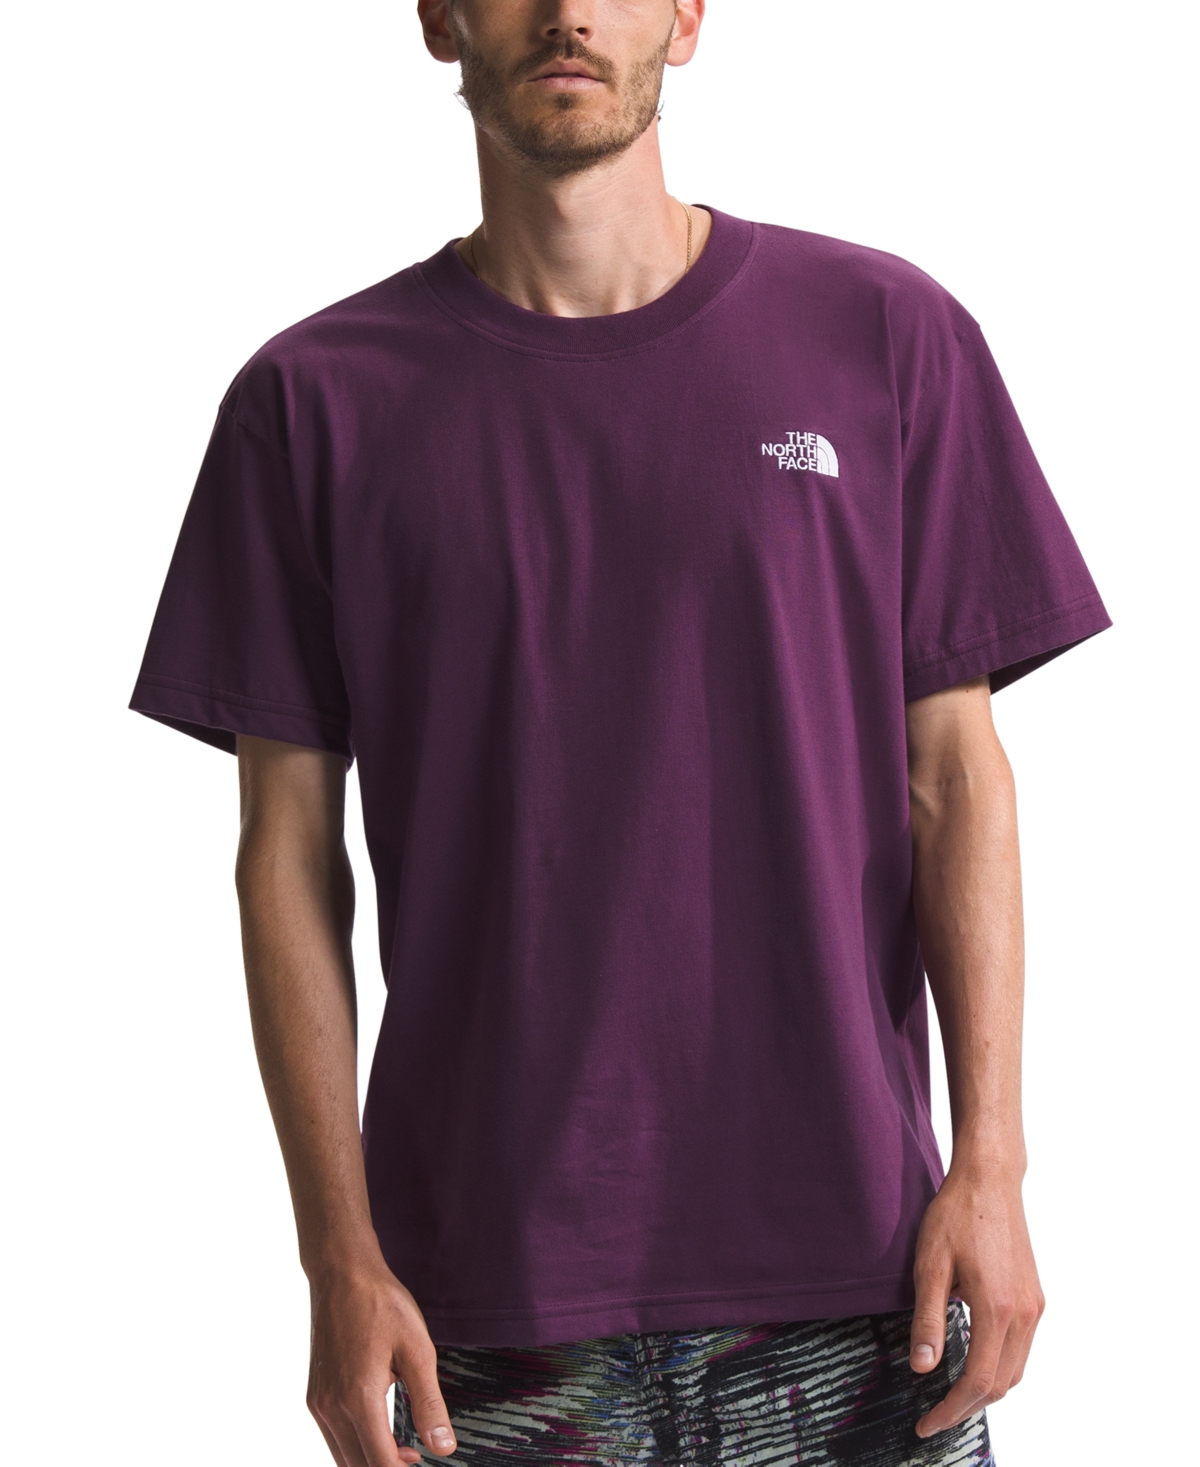 THE NORTH FACE MEN'S EVOLUTION RELAXED LOGO T-SHIRT